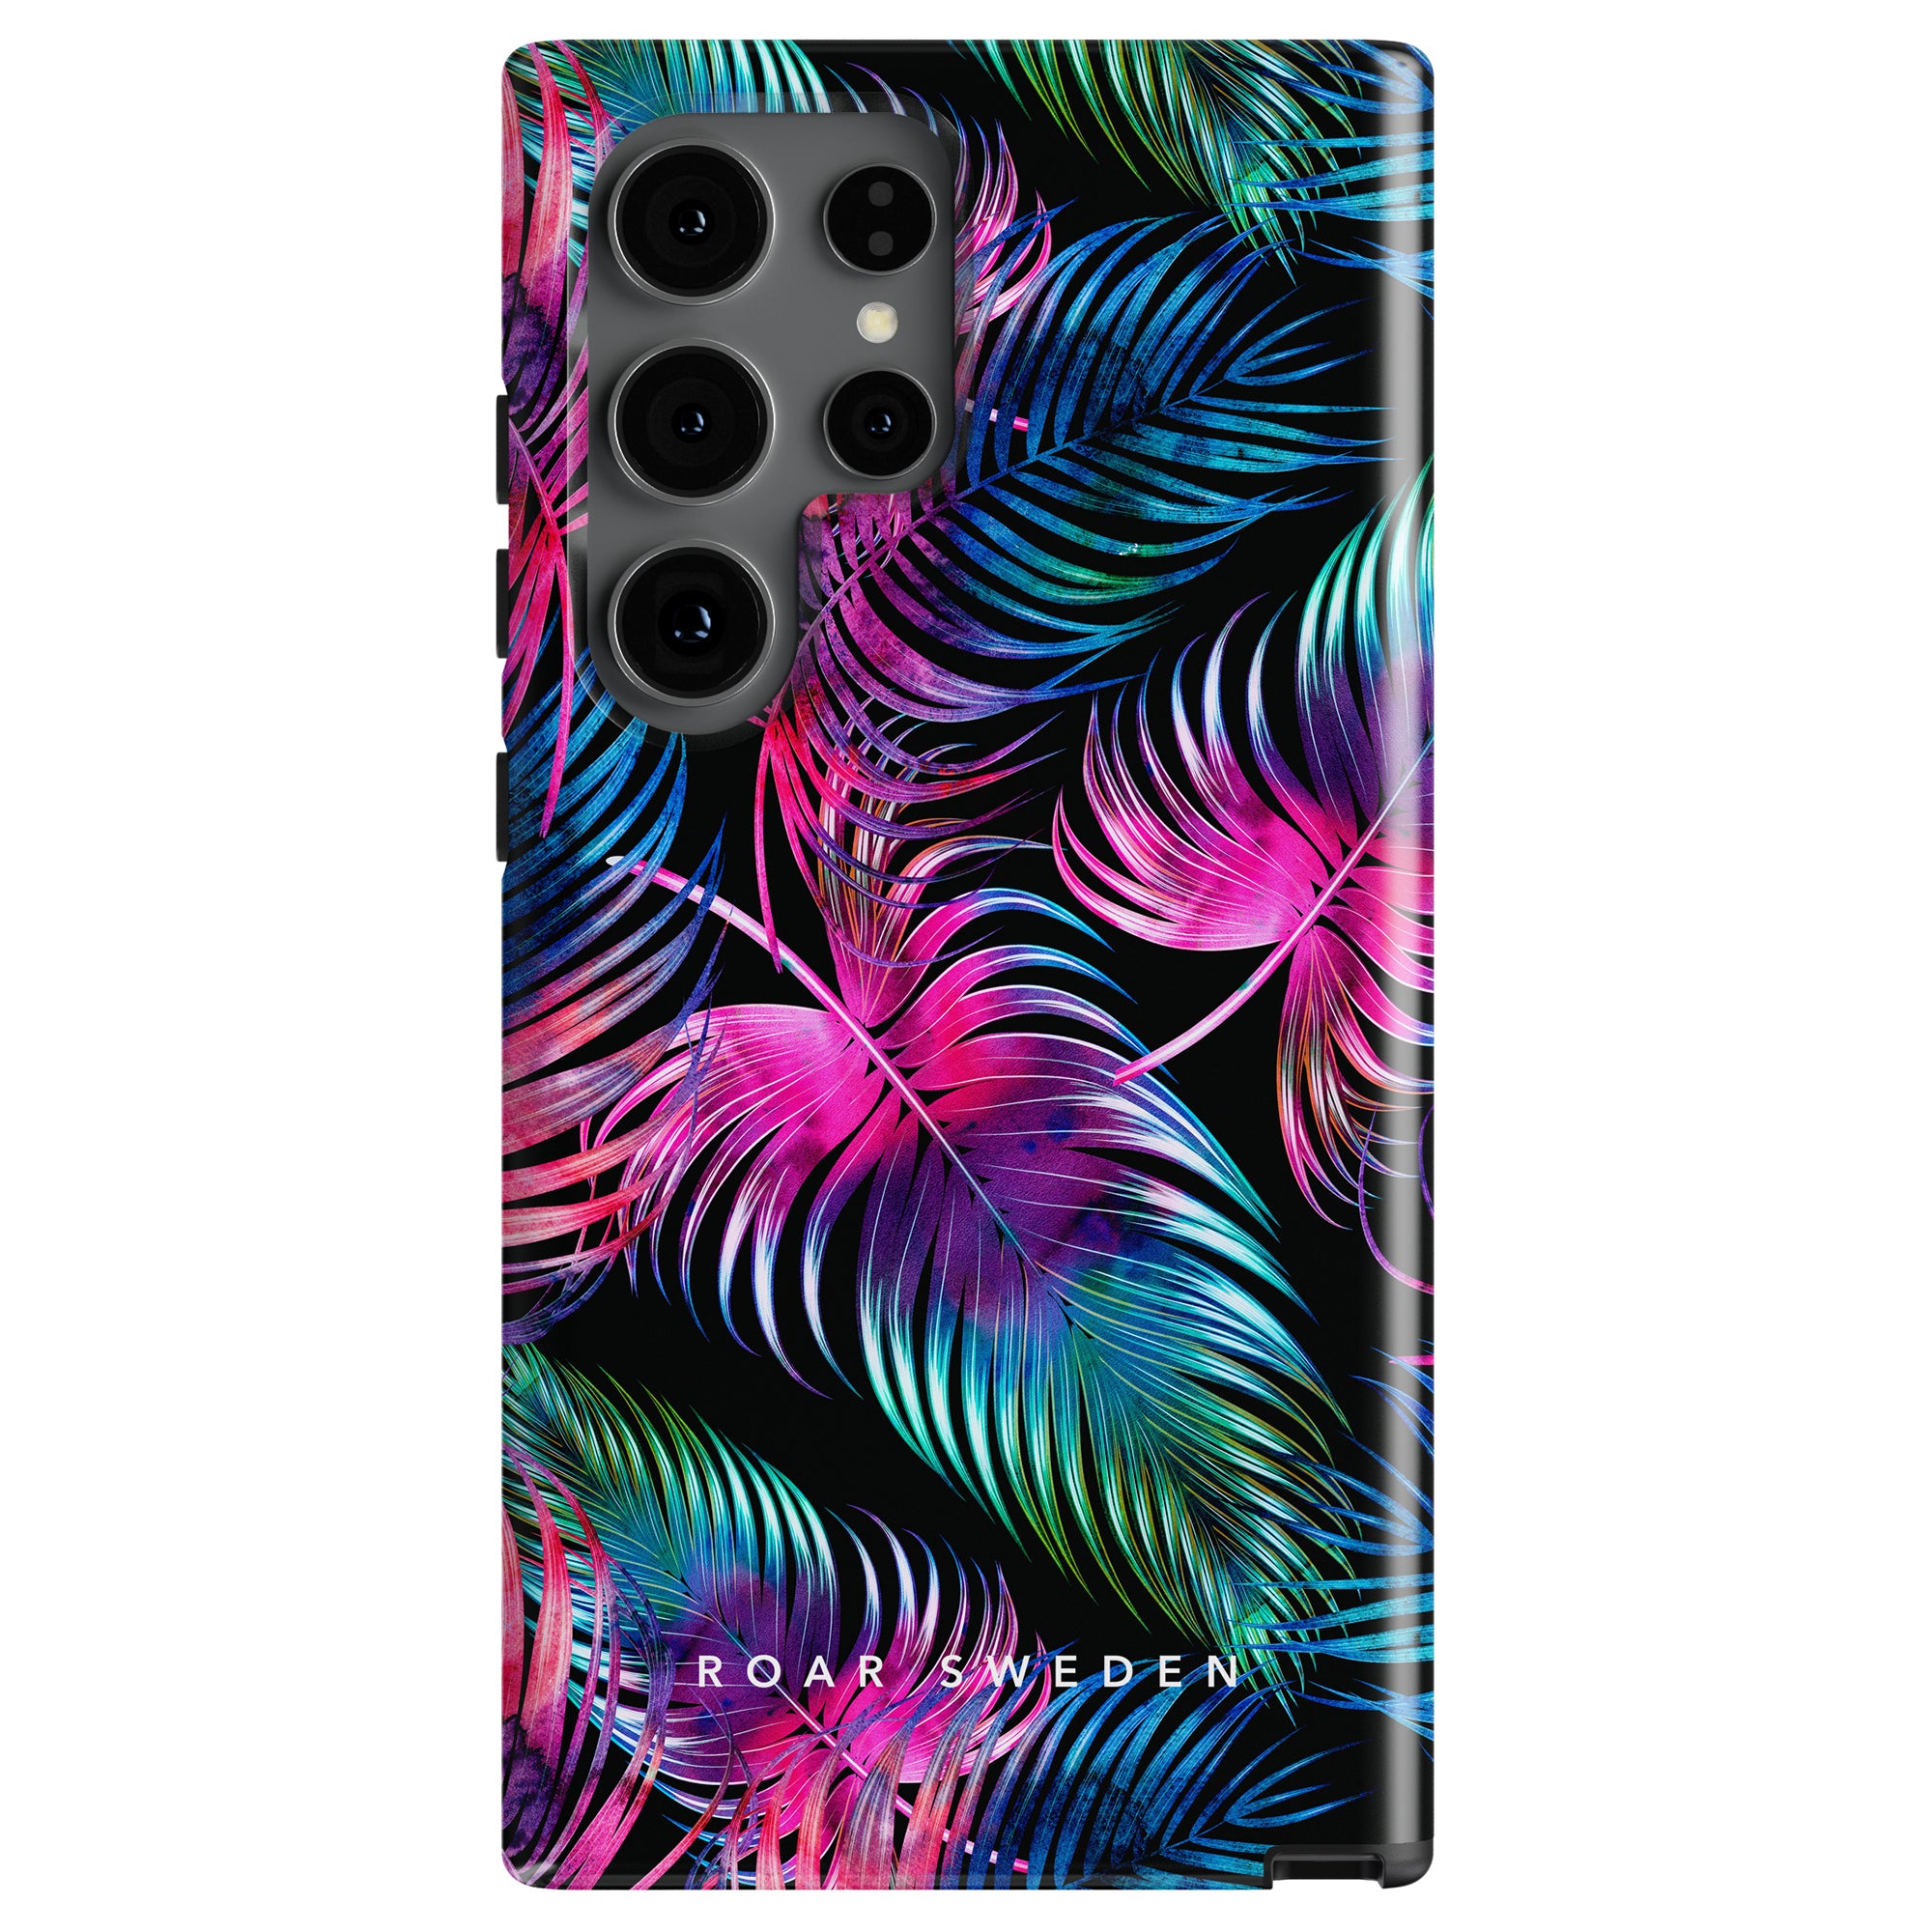 A smartphone adorned with the Neon Fern - Tough case boasts a colorful, tropical-themed design featuring vibrant palm leaves in shades of pink, blue, and green against a black background—all while providing hållbart skydd.